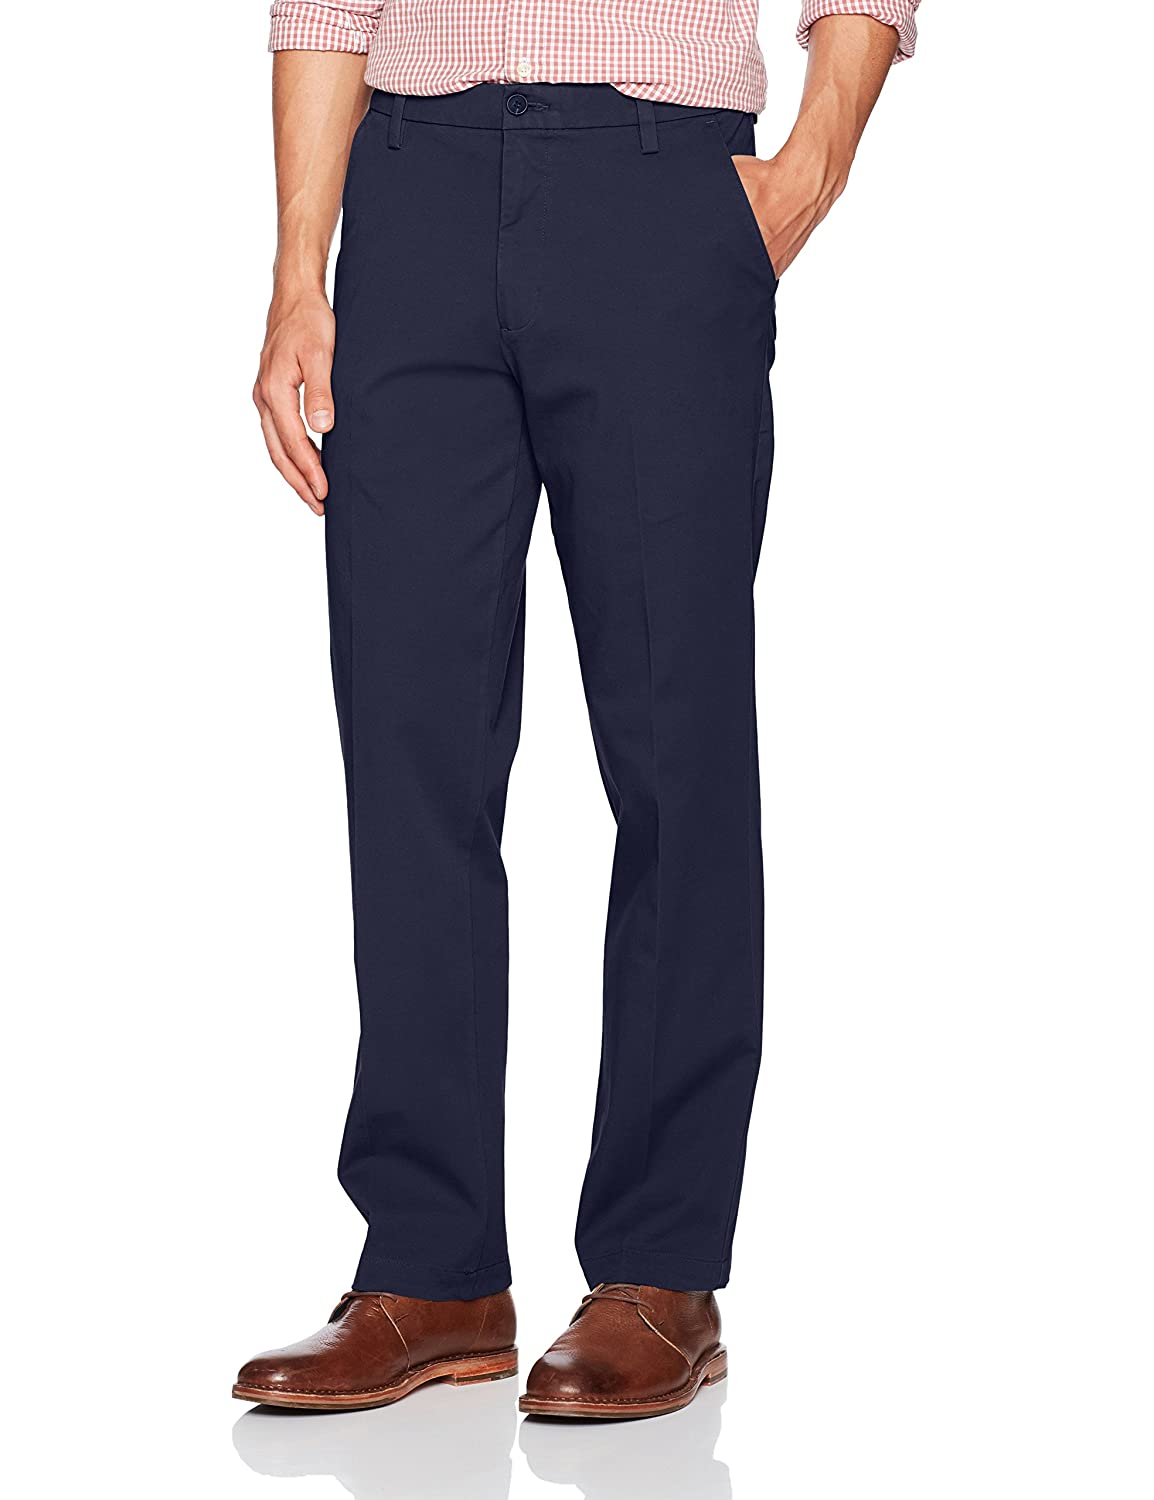 Dockers Men's Straight Fit Workday Khaki Pants with Smart, Blue, Size ...